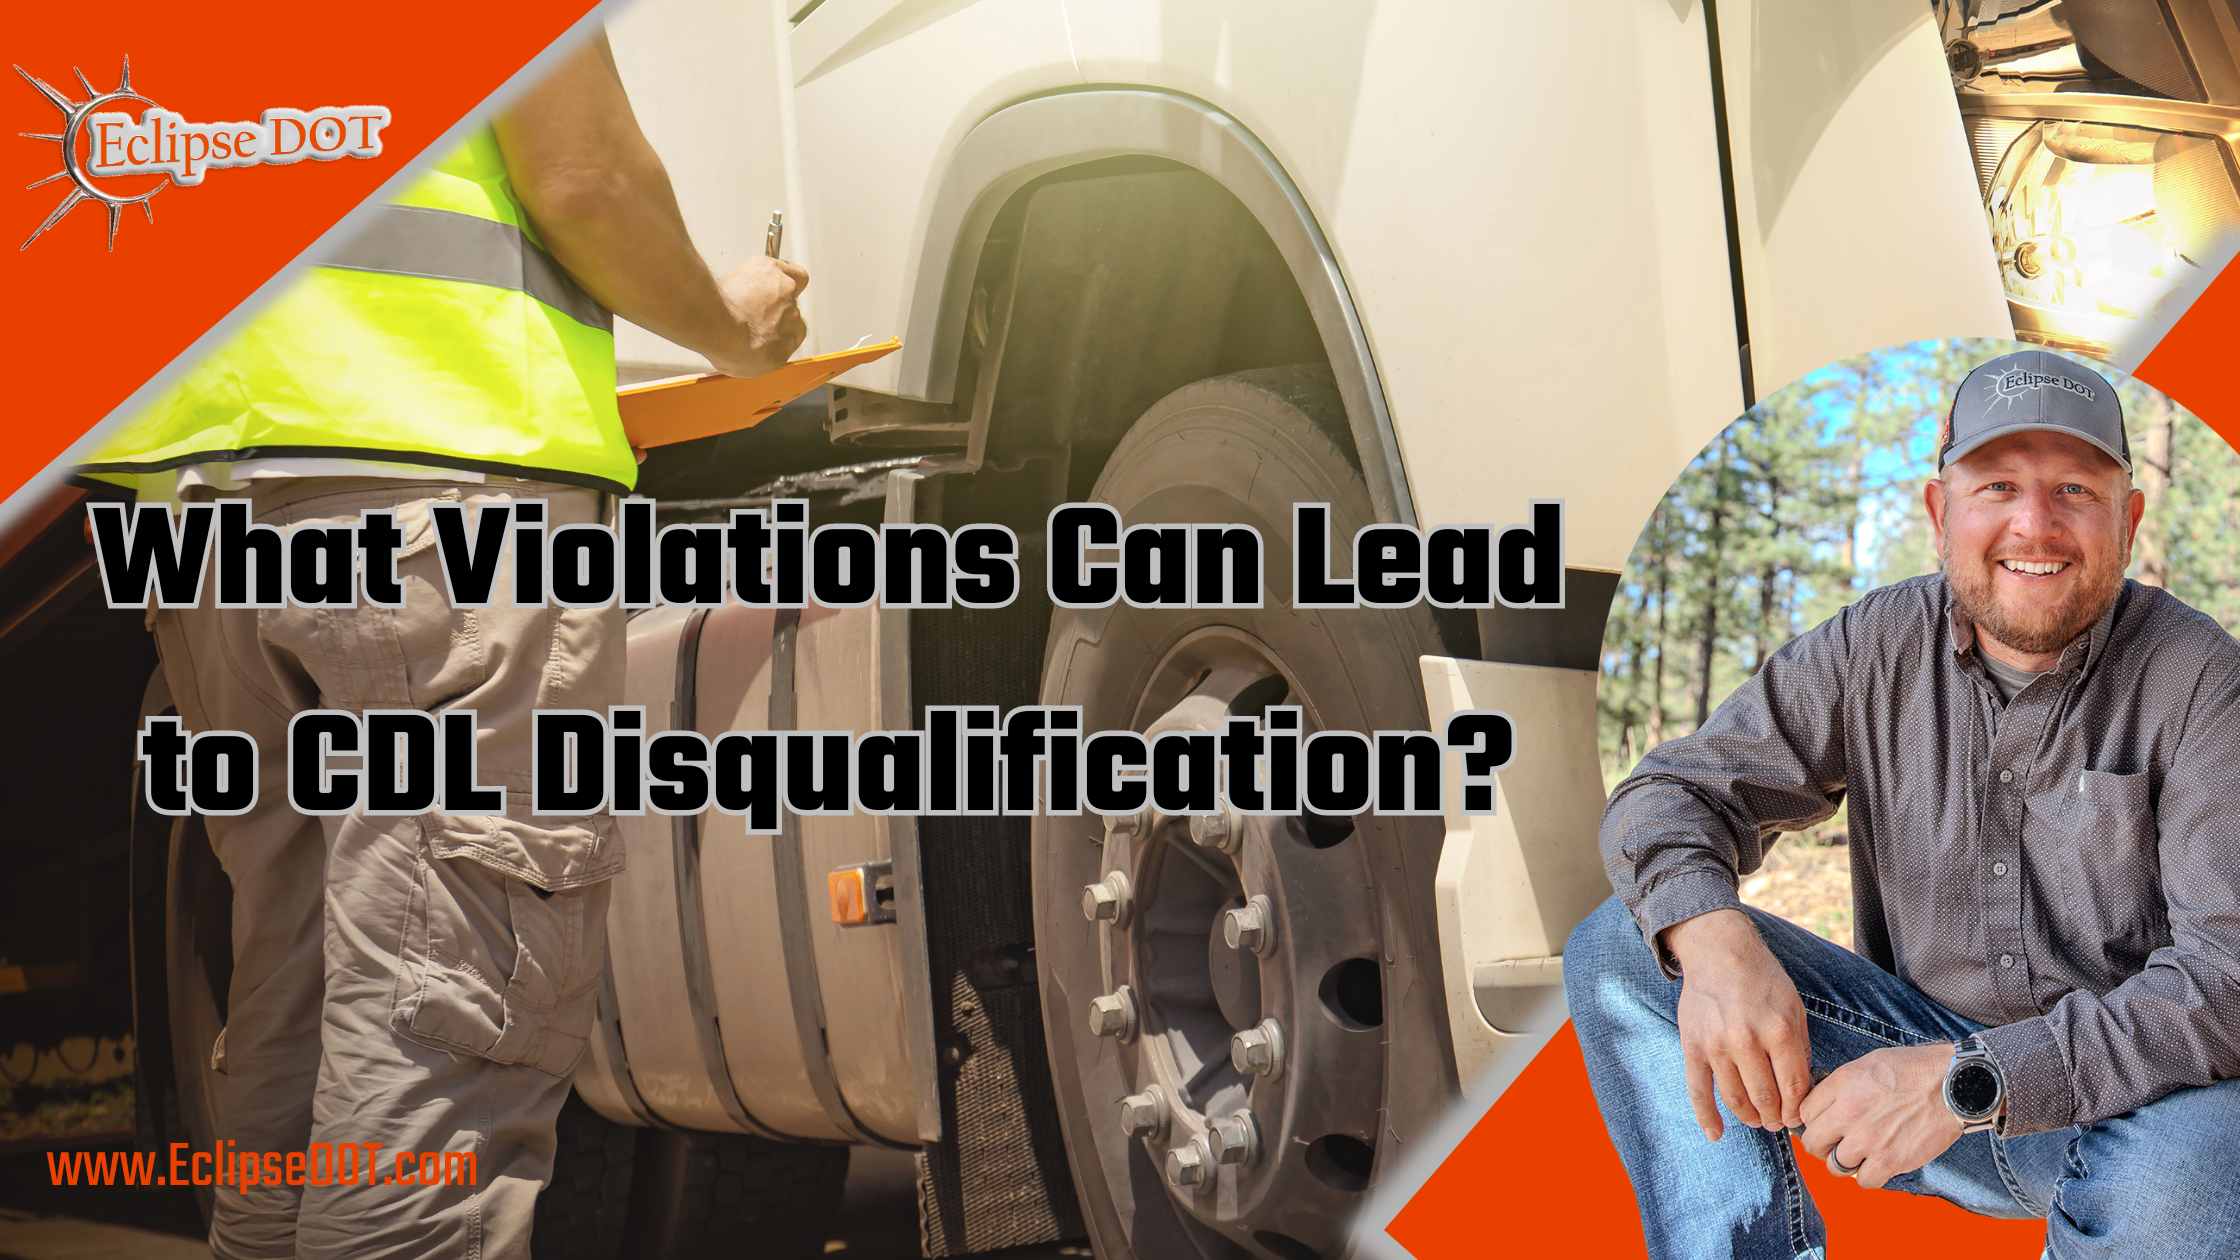 What Violations Can Lead to CDL Disqualification?